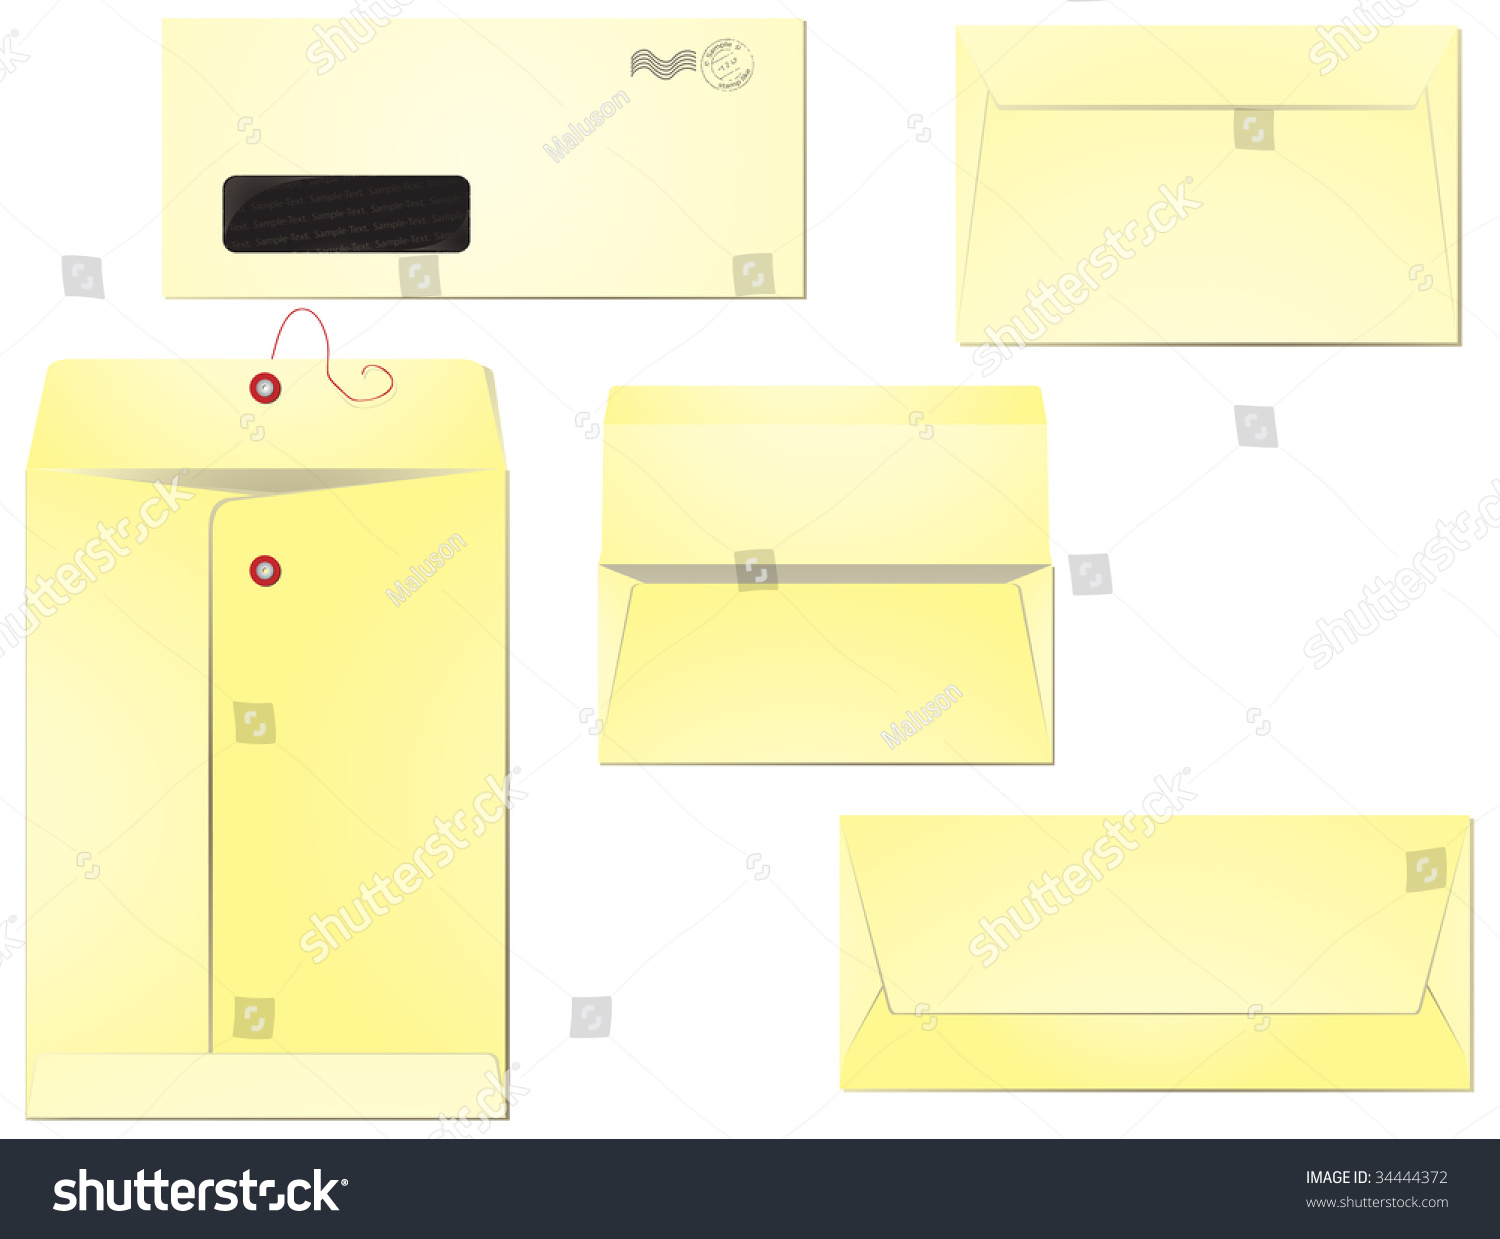 five-different-types-envelopes-business-correspondence-stock-vector-royalty-free-34444372